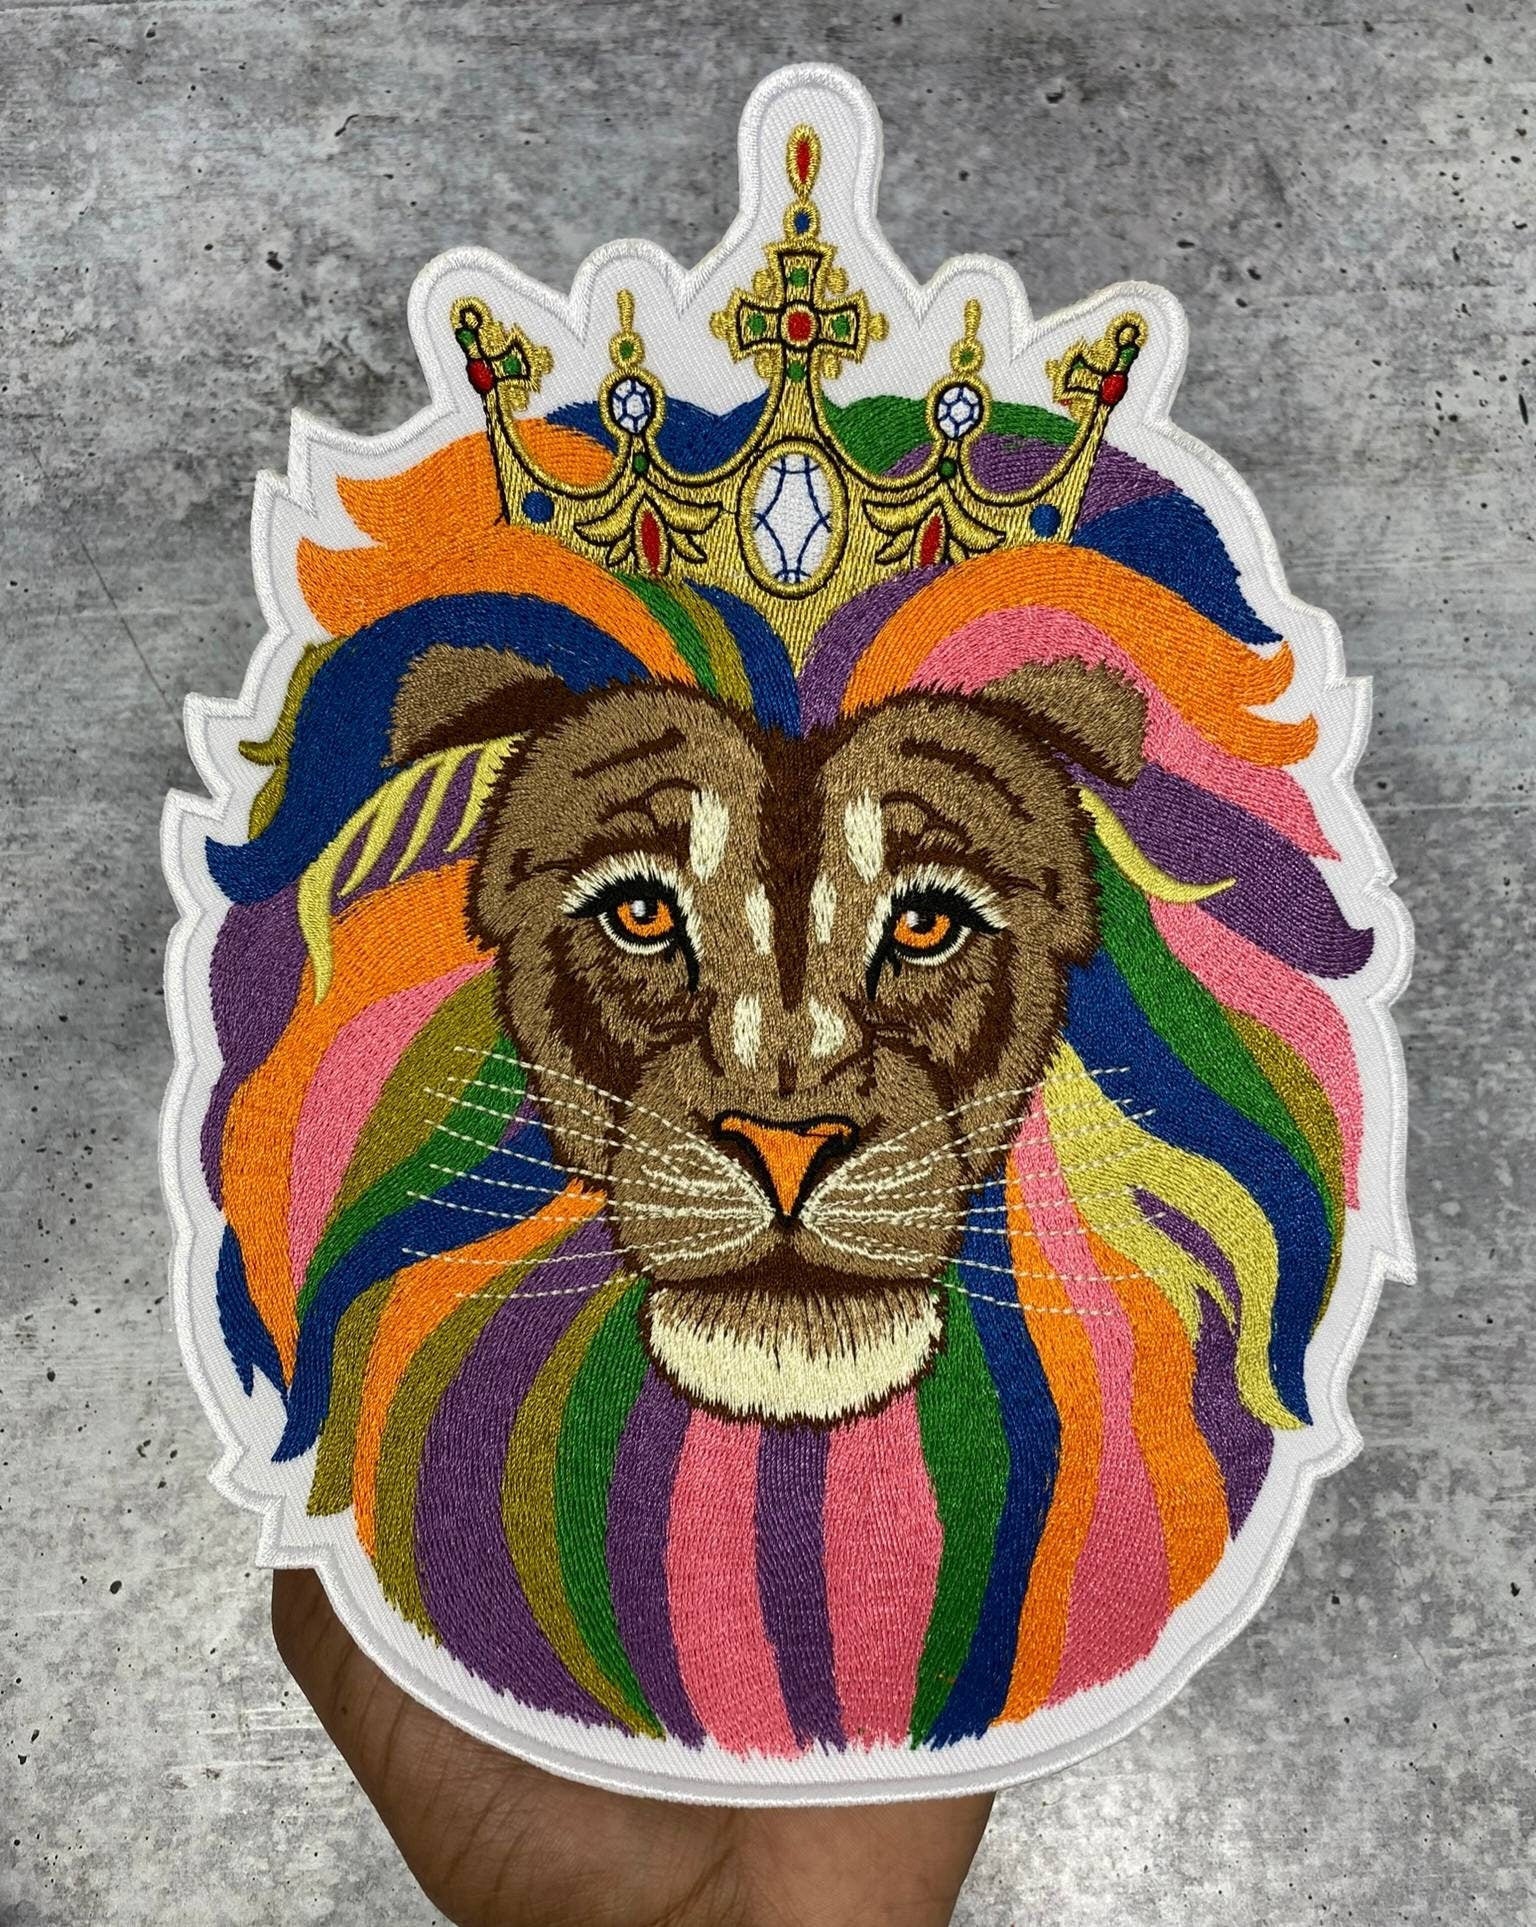 Exclusive: 1-pc Colorful Queen Lion w/GOLD Crown 100% Embroidered Iron on  Patch, DIY Applique, Large Patch, Size 9, Jacket Patch for Her